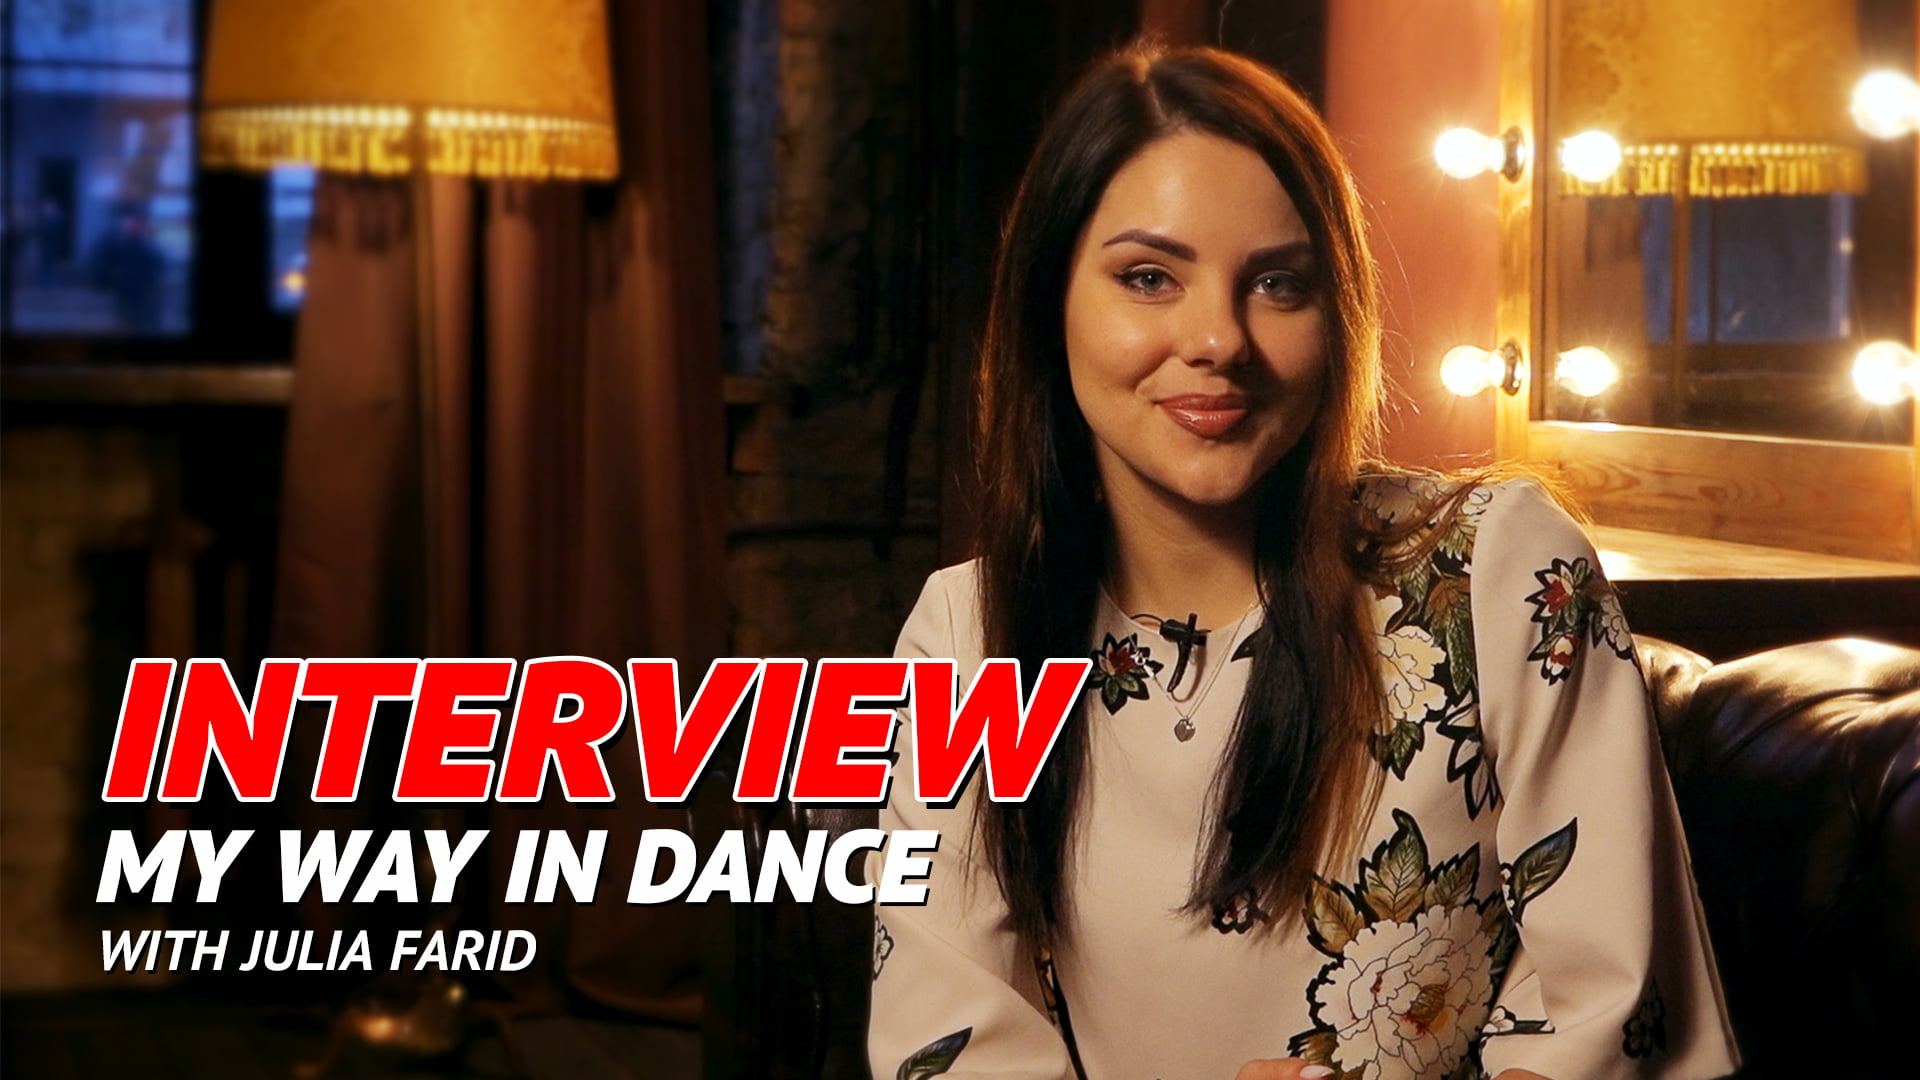 FREE VIDEO! My way in dance – interview with Julia Farid - Bellystream.TV